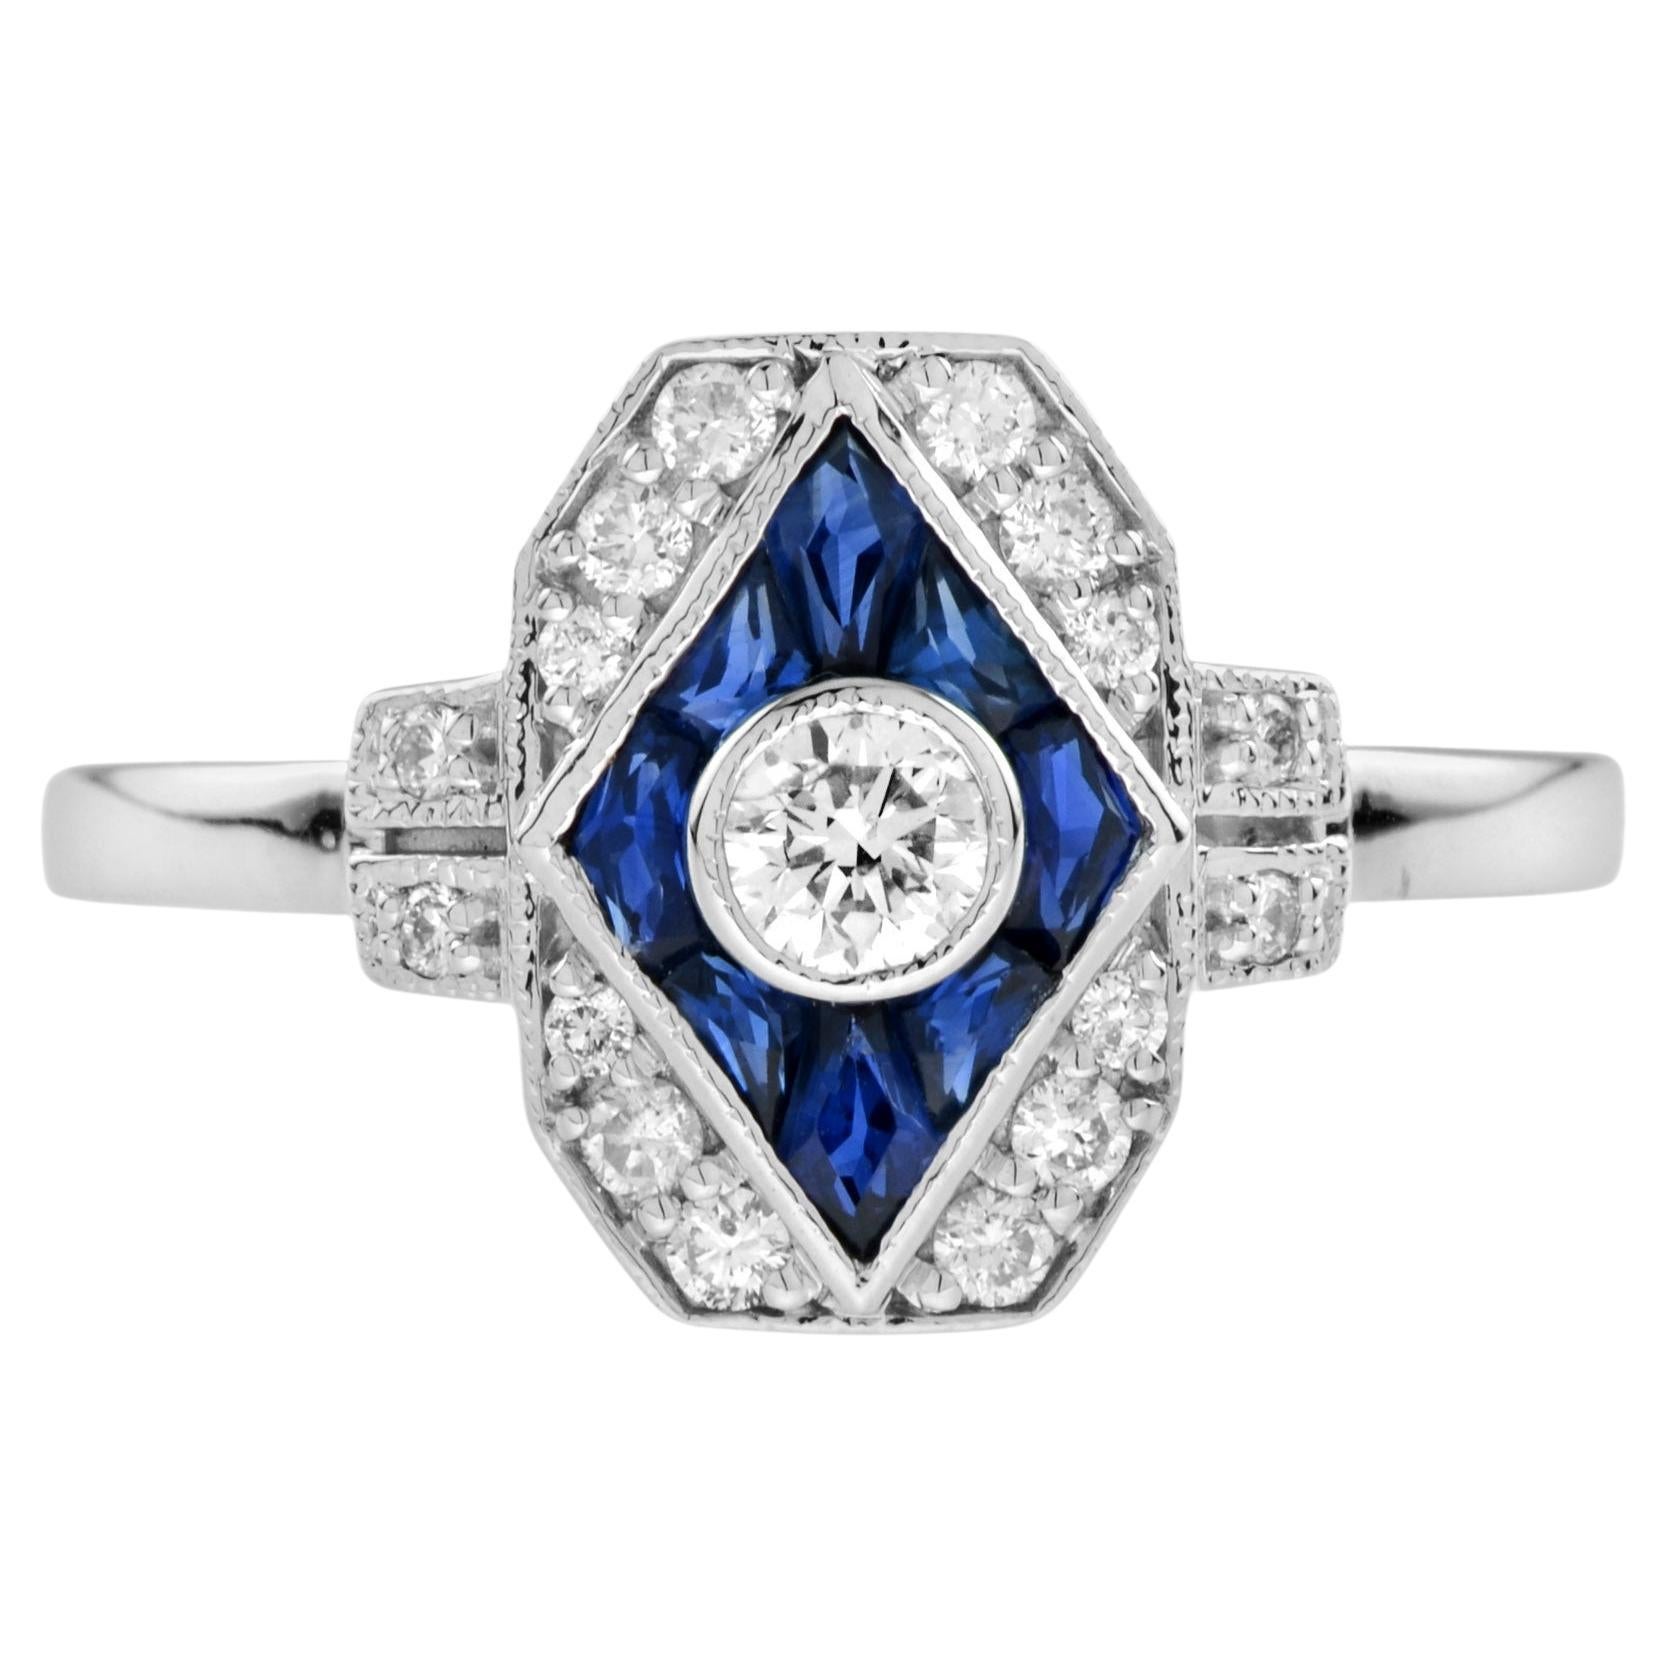 Diamond and Blue Sapphire Art Deco Style Engagement Ring in 14k White Gold For Sale